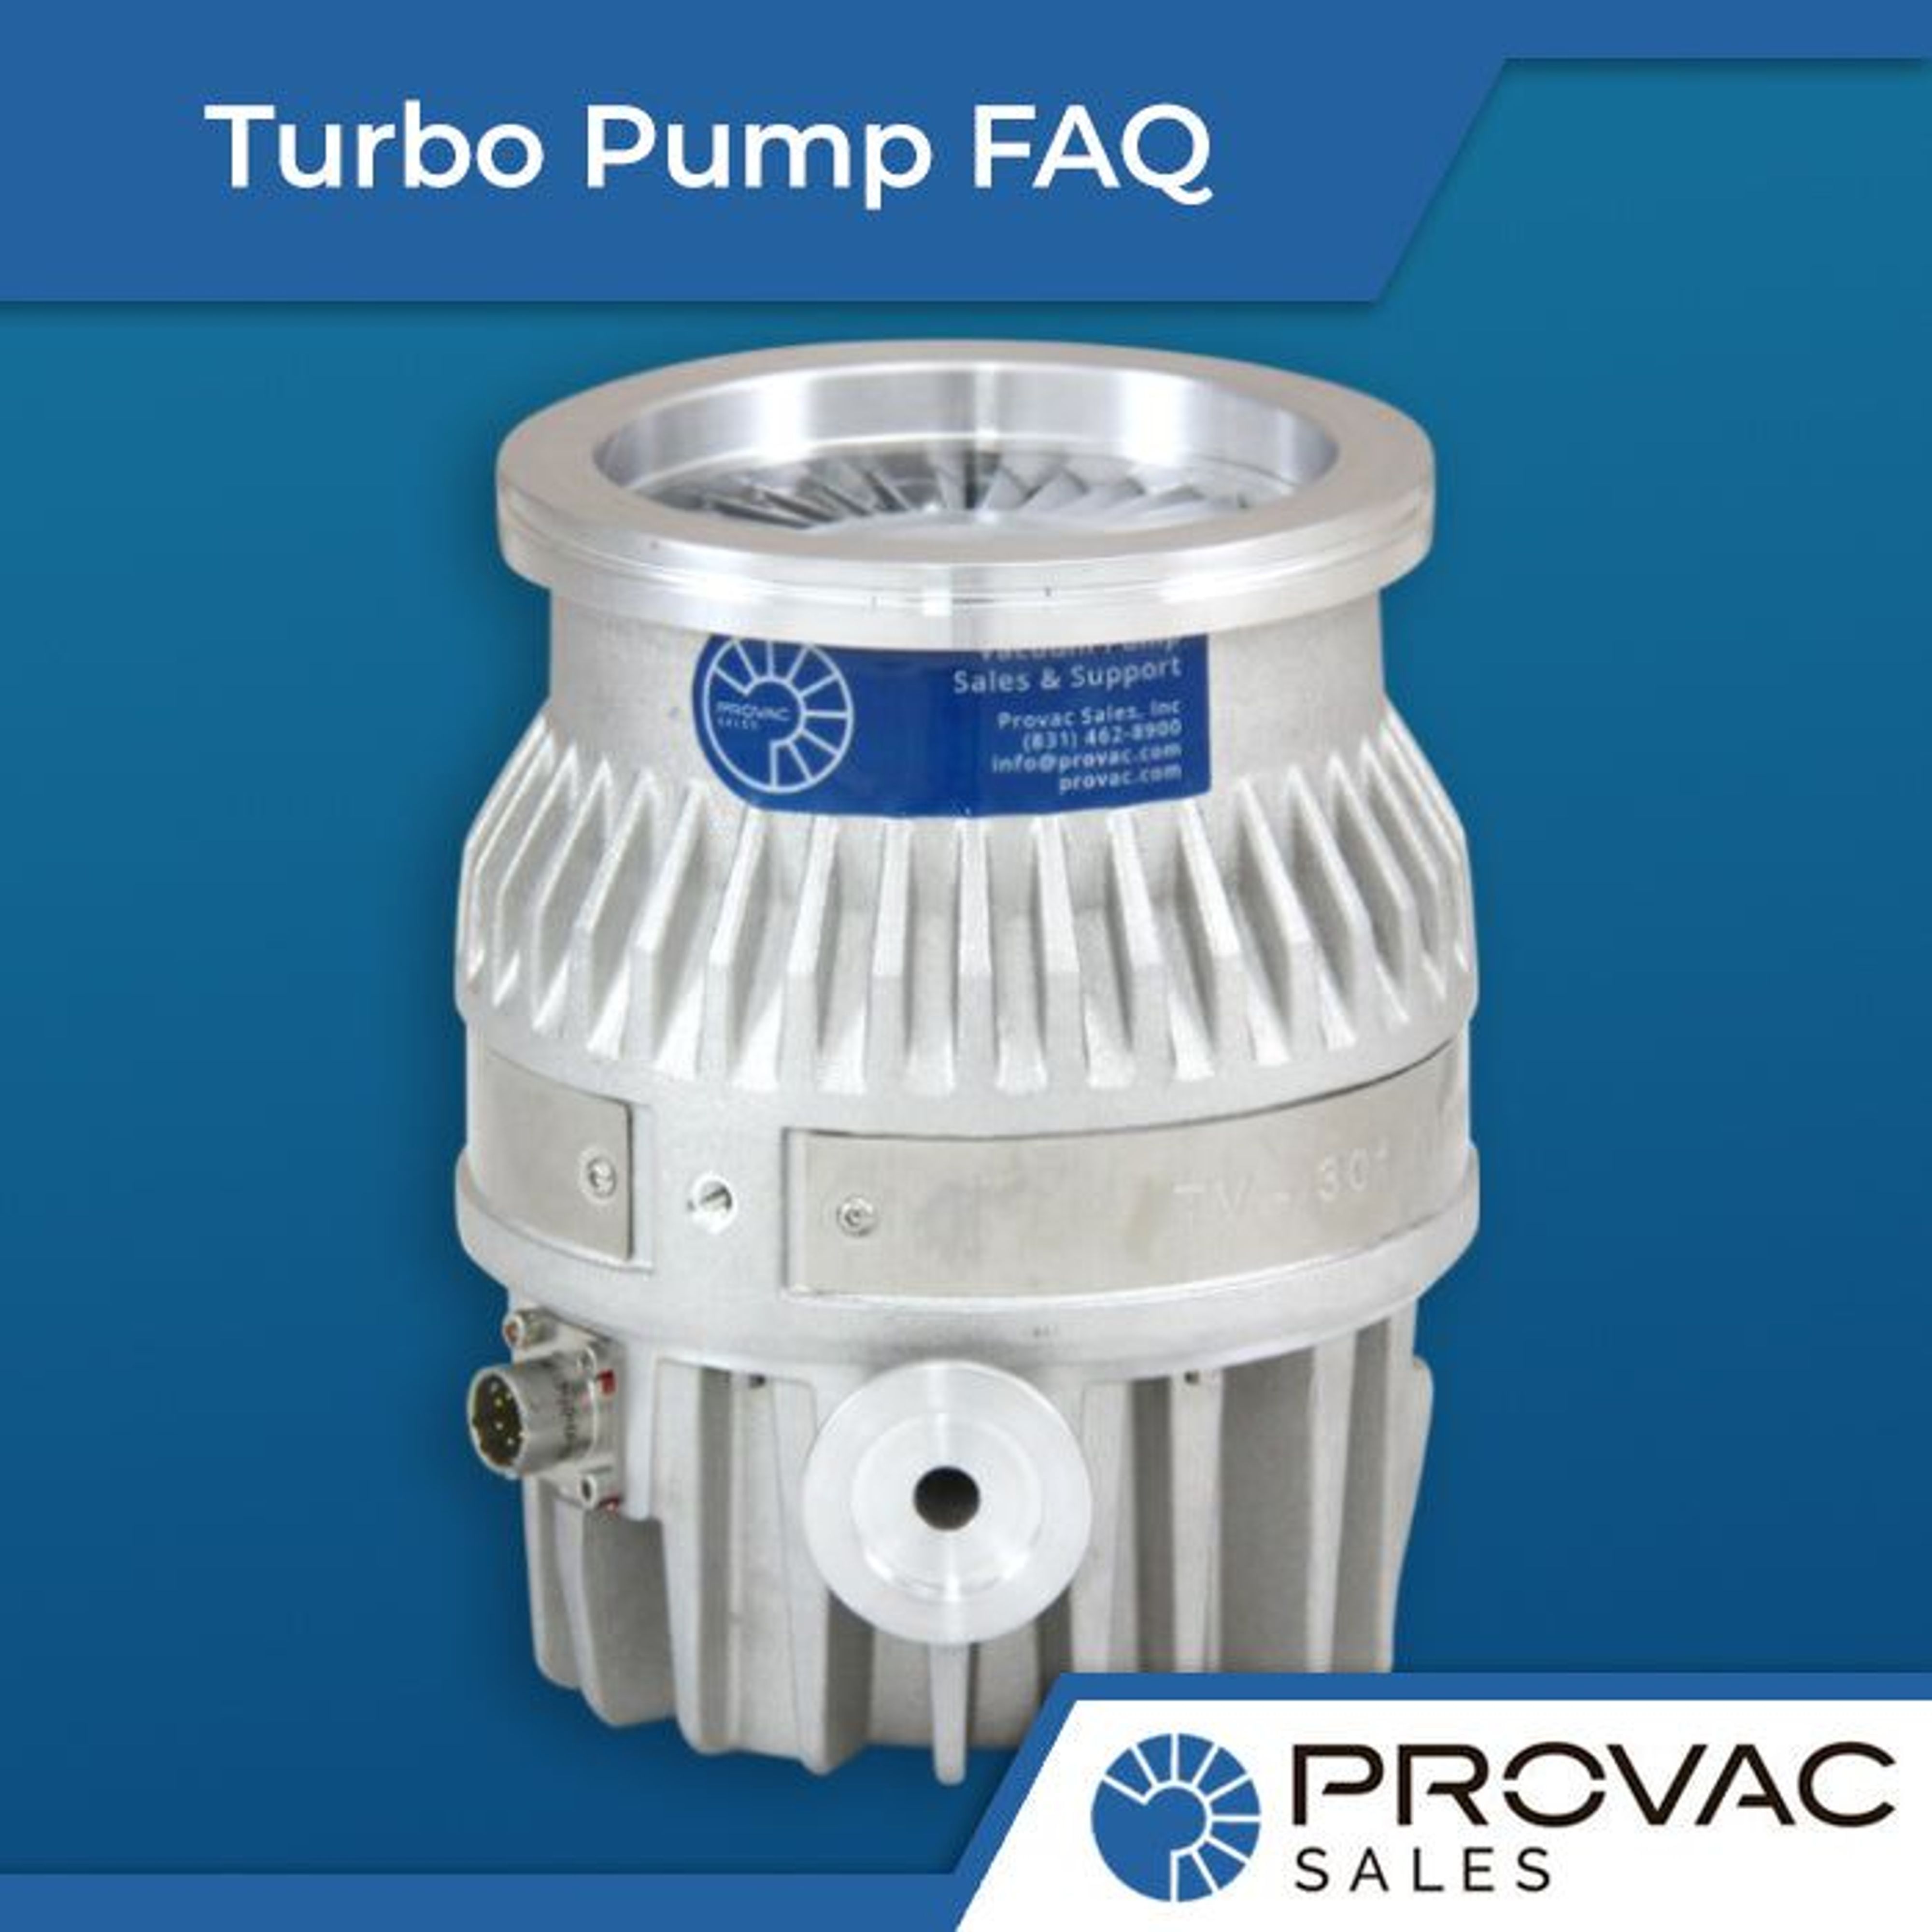 Turbo Pumps - Frequently Asked Questions Background